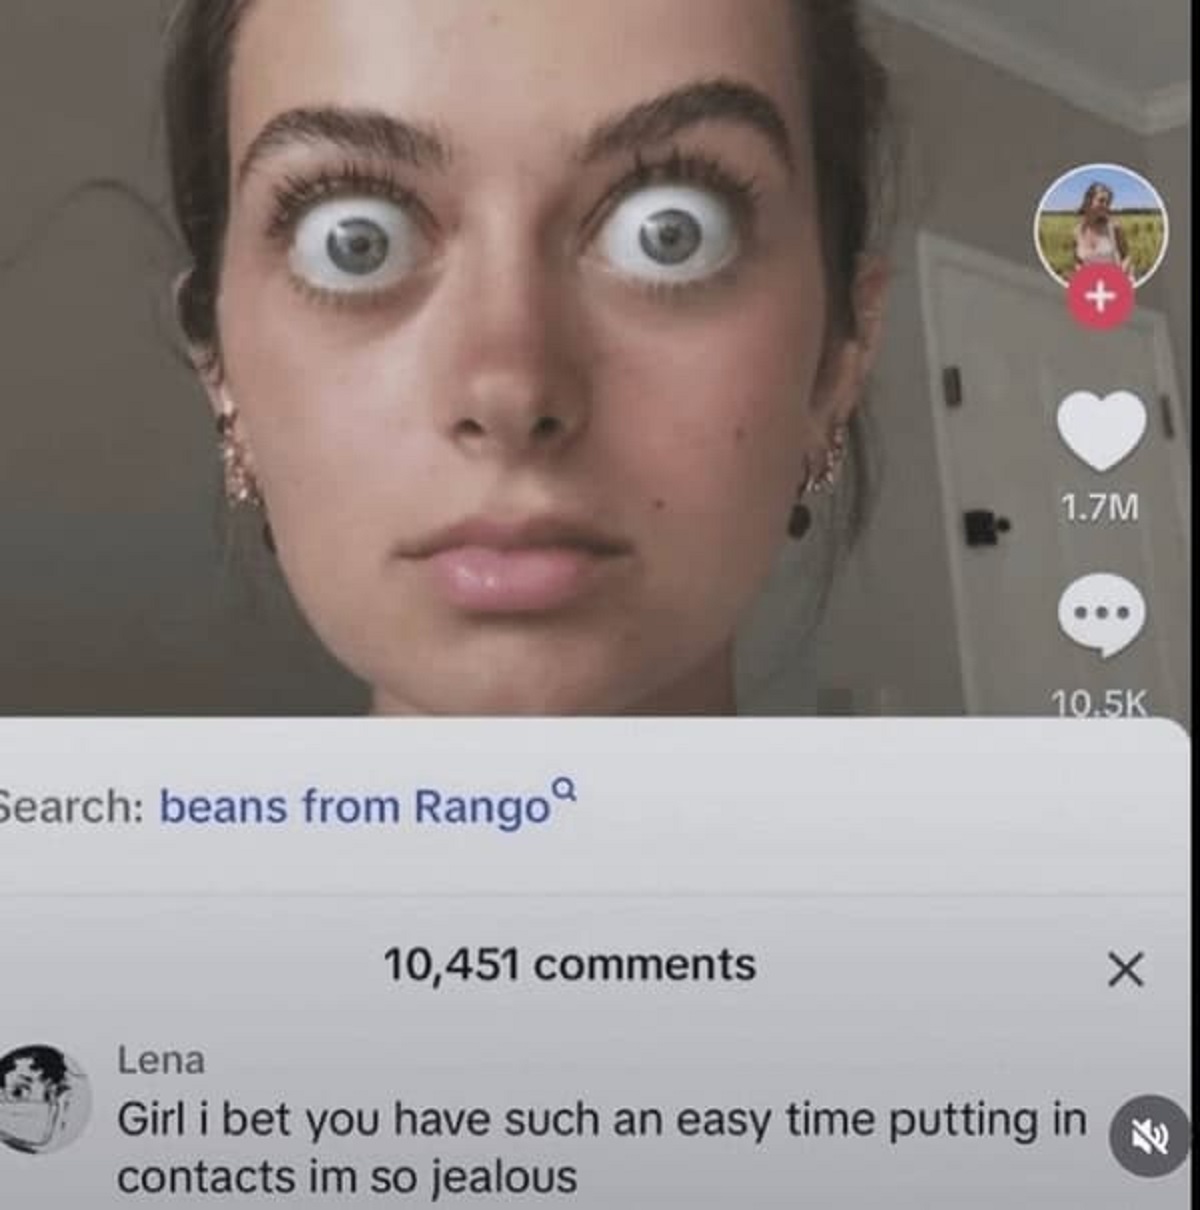 beans rango meme - Search beans from Rango 10,451 1.7M Lena Girl i bet you have such an easy time putting in contacts im so jealous